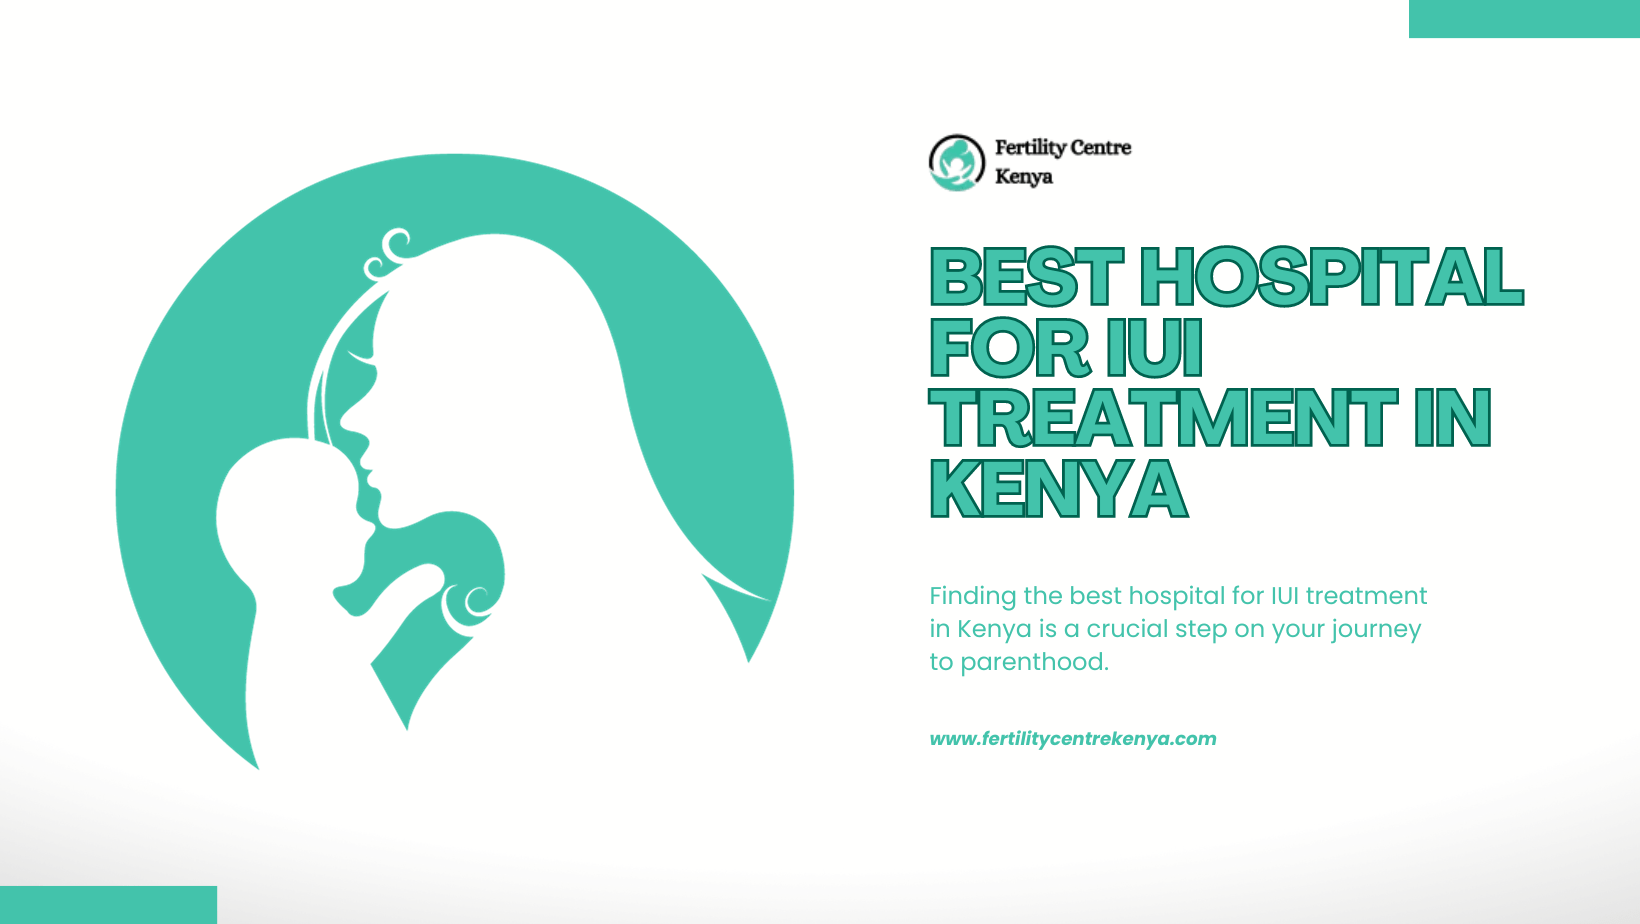 How to Choose the Best Hospital for IUI Treatment in Kenya?